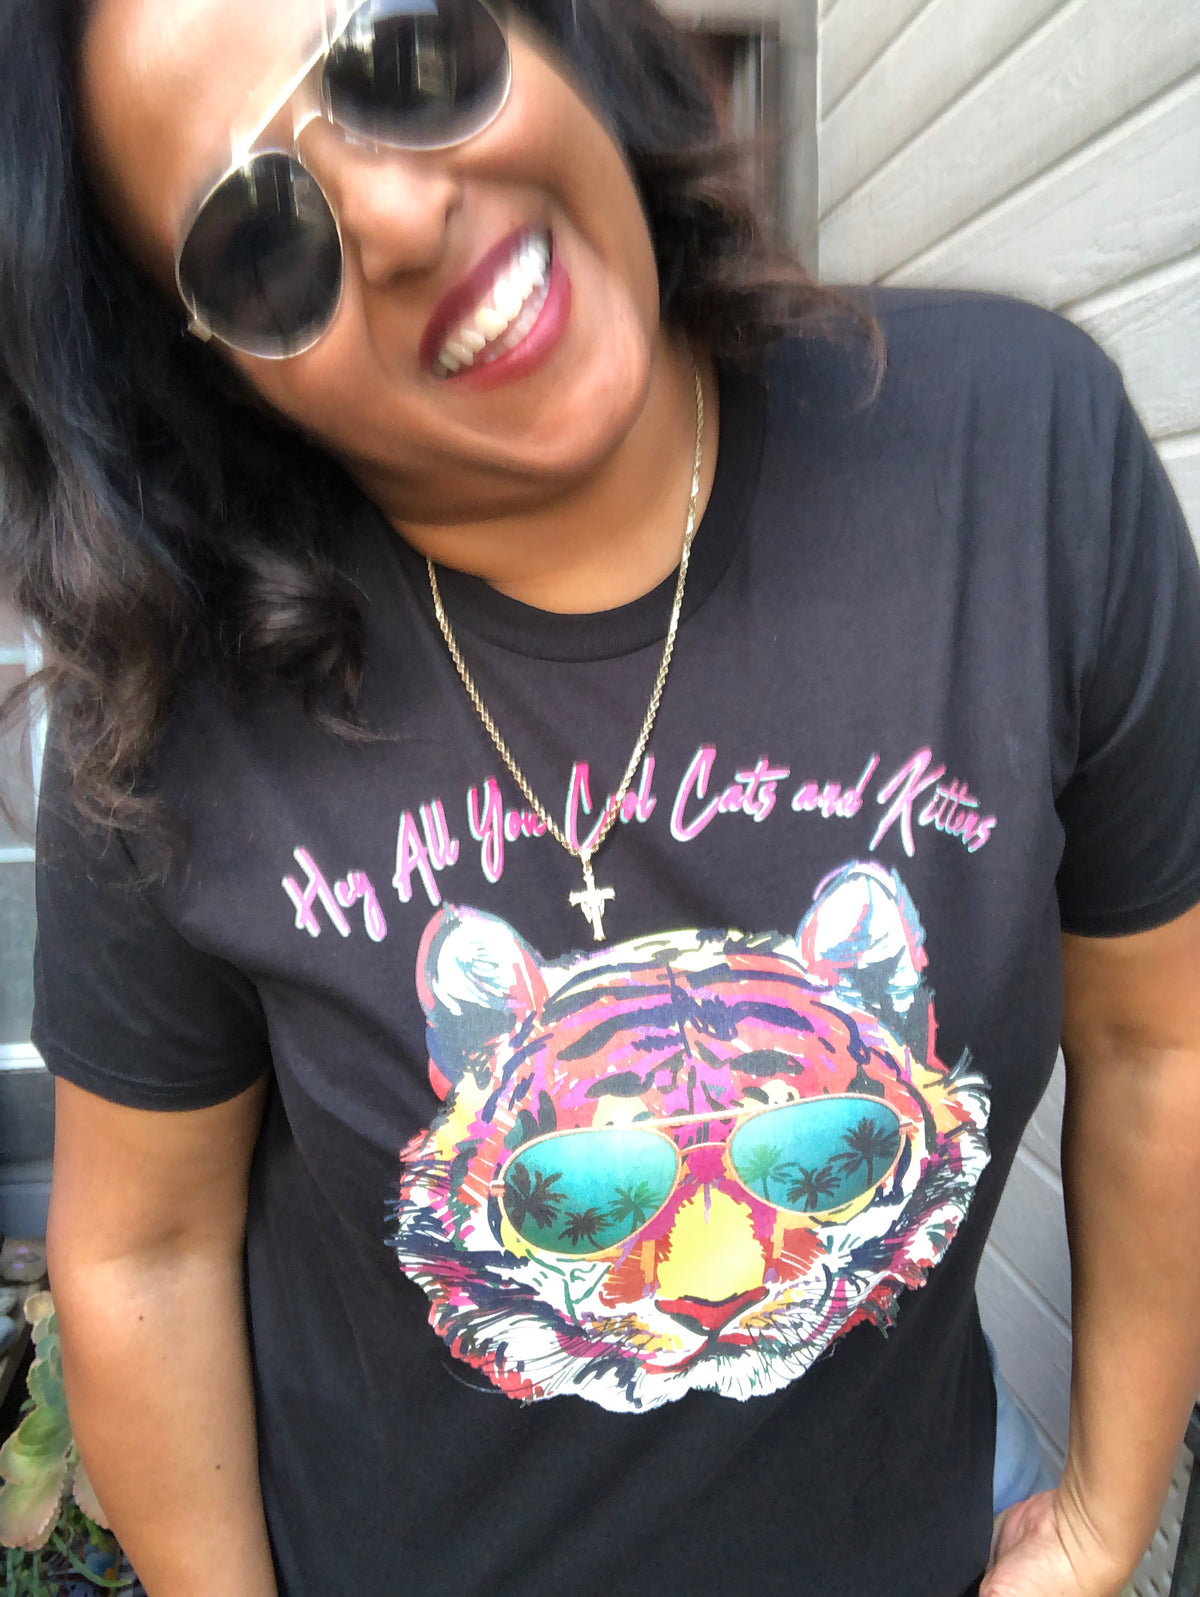 Hey all you Cool Cats and Kittens Graphic Tee